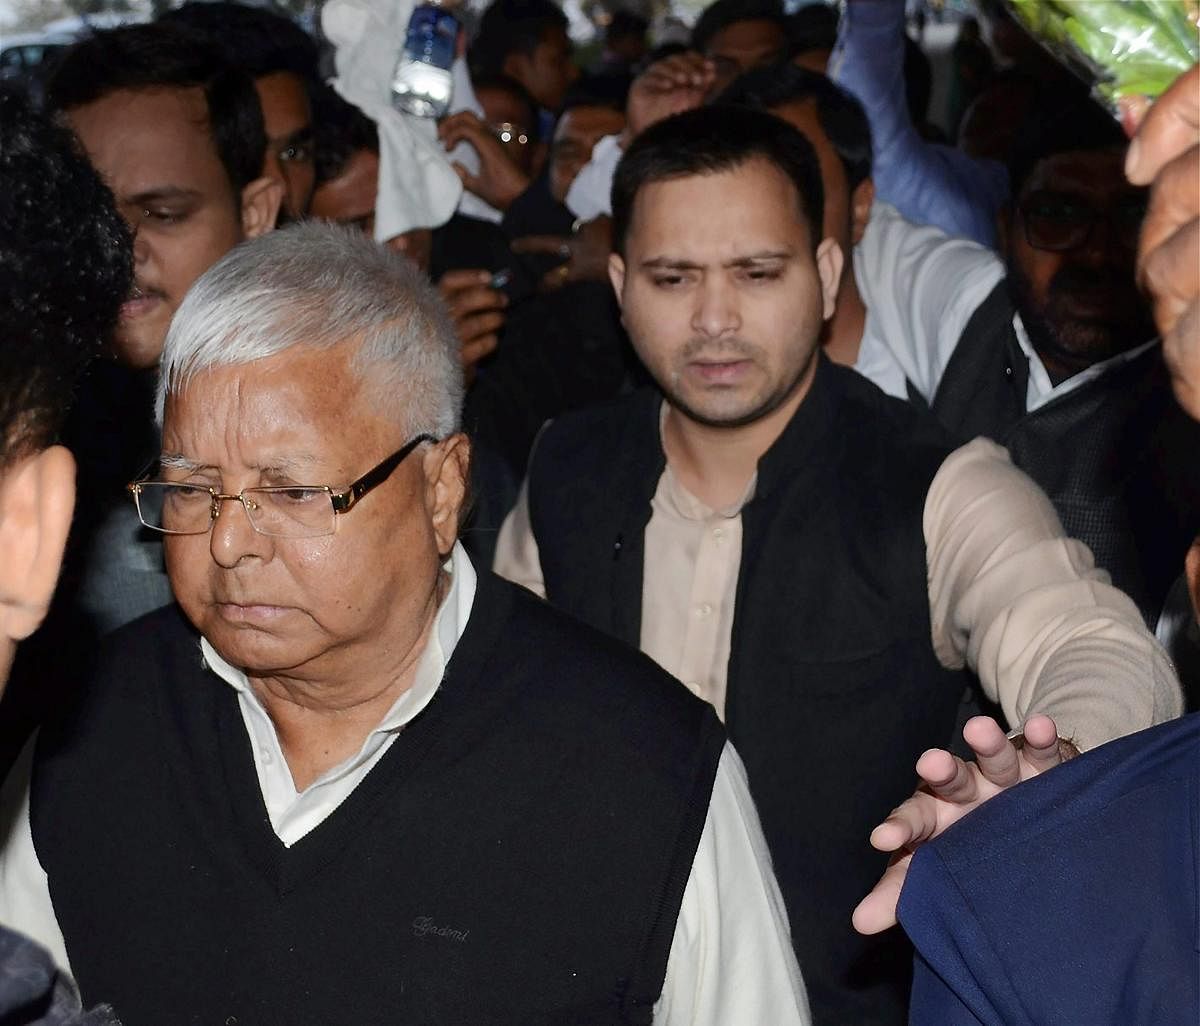 RJD Chief Lalu Prasad and his son Tejashwi Yadav seen at Patna airport as he leaves for Ranchi where a special CBI judge is expected to pronounce judgment in fodder scam case, in Patna on Friday. PTI